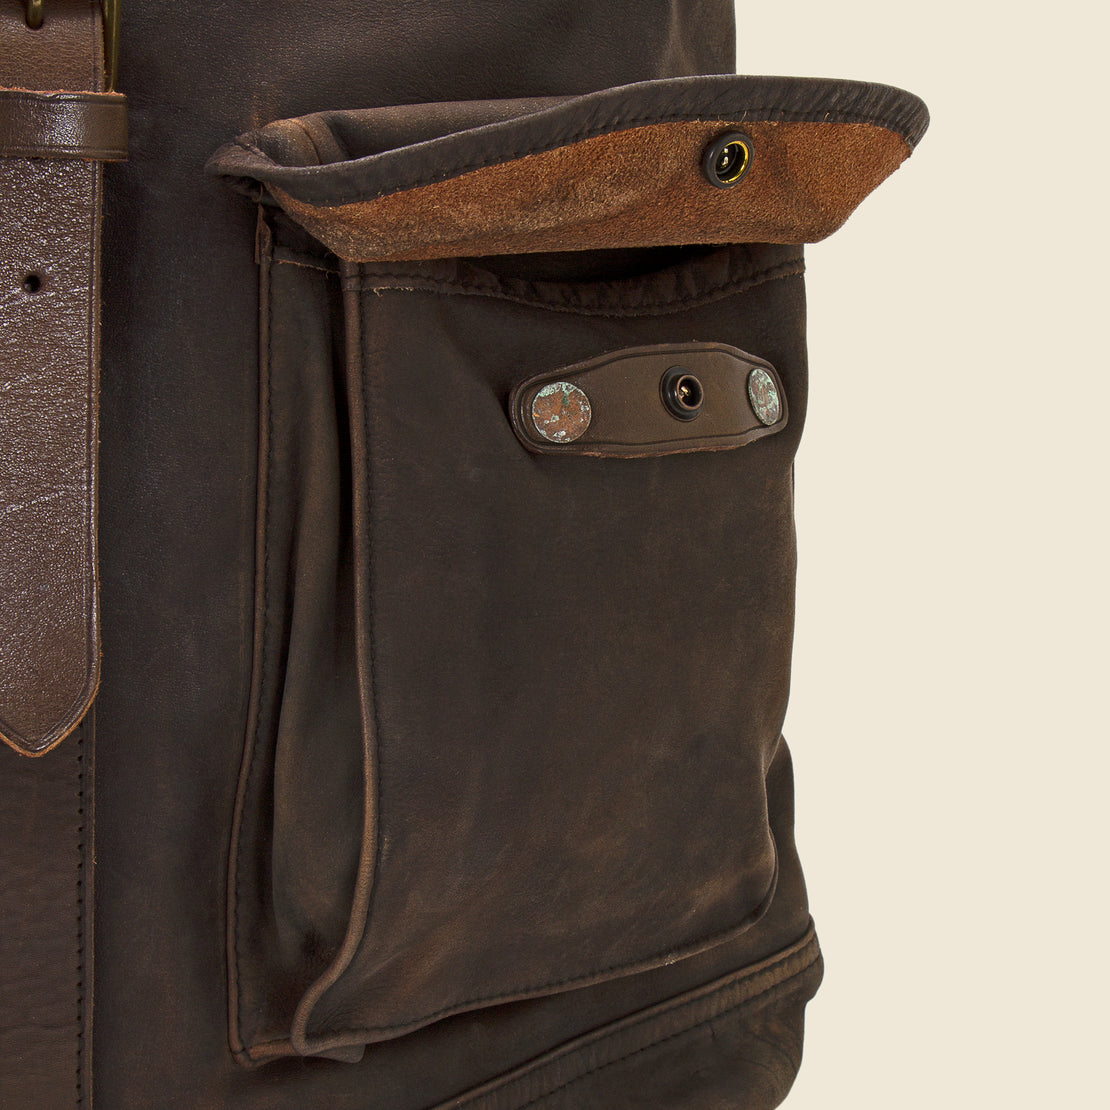 Leather Rucksack - Black Over Brown - RRL - STAG Provisions - Accessories - Bags / Luggage